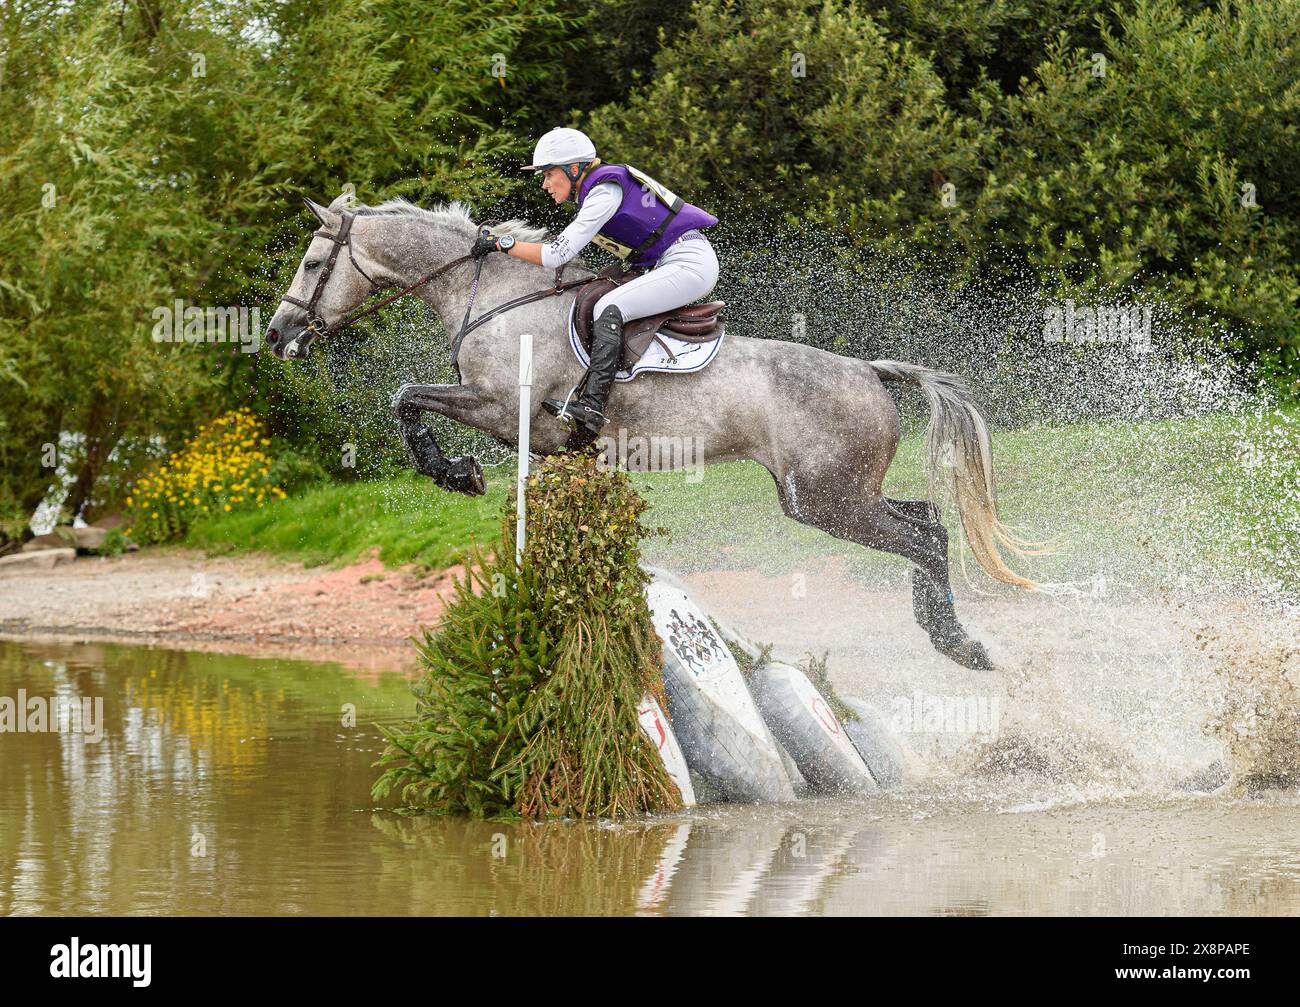 Georgie Campbell and DARCY DE LA ROSE (3*L) - Hartpury International Horse Trials, Saturday 14 August 2021 © 2021 Nico Morgan. All Rights Reserved Stock Photo